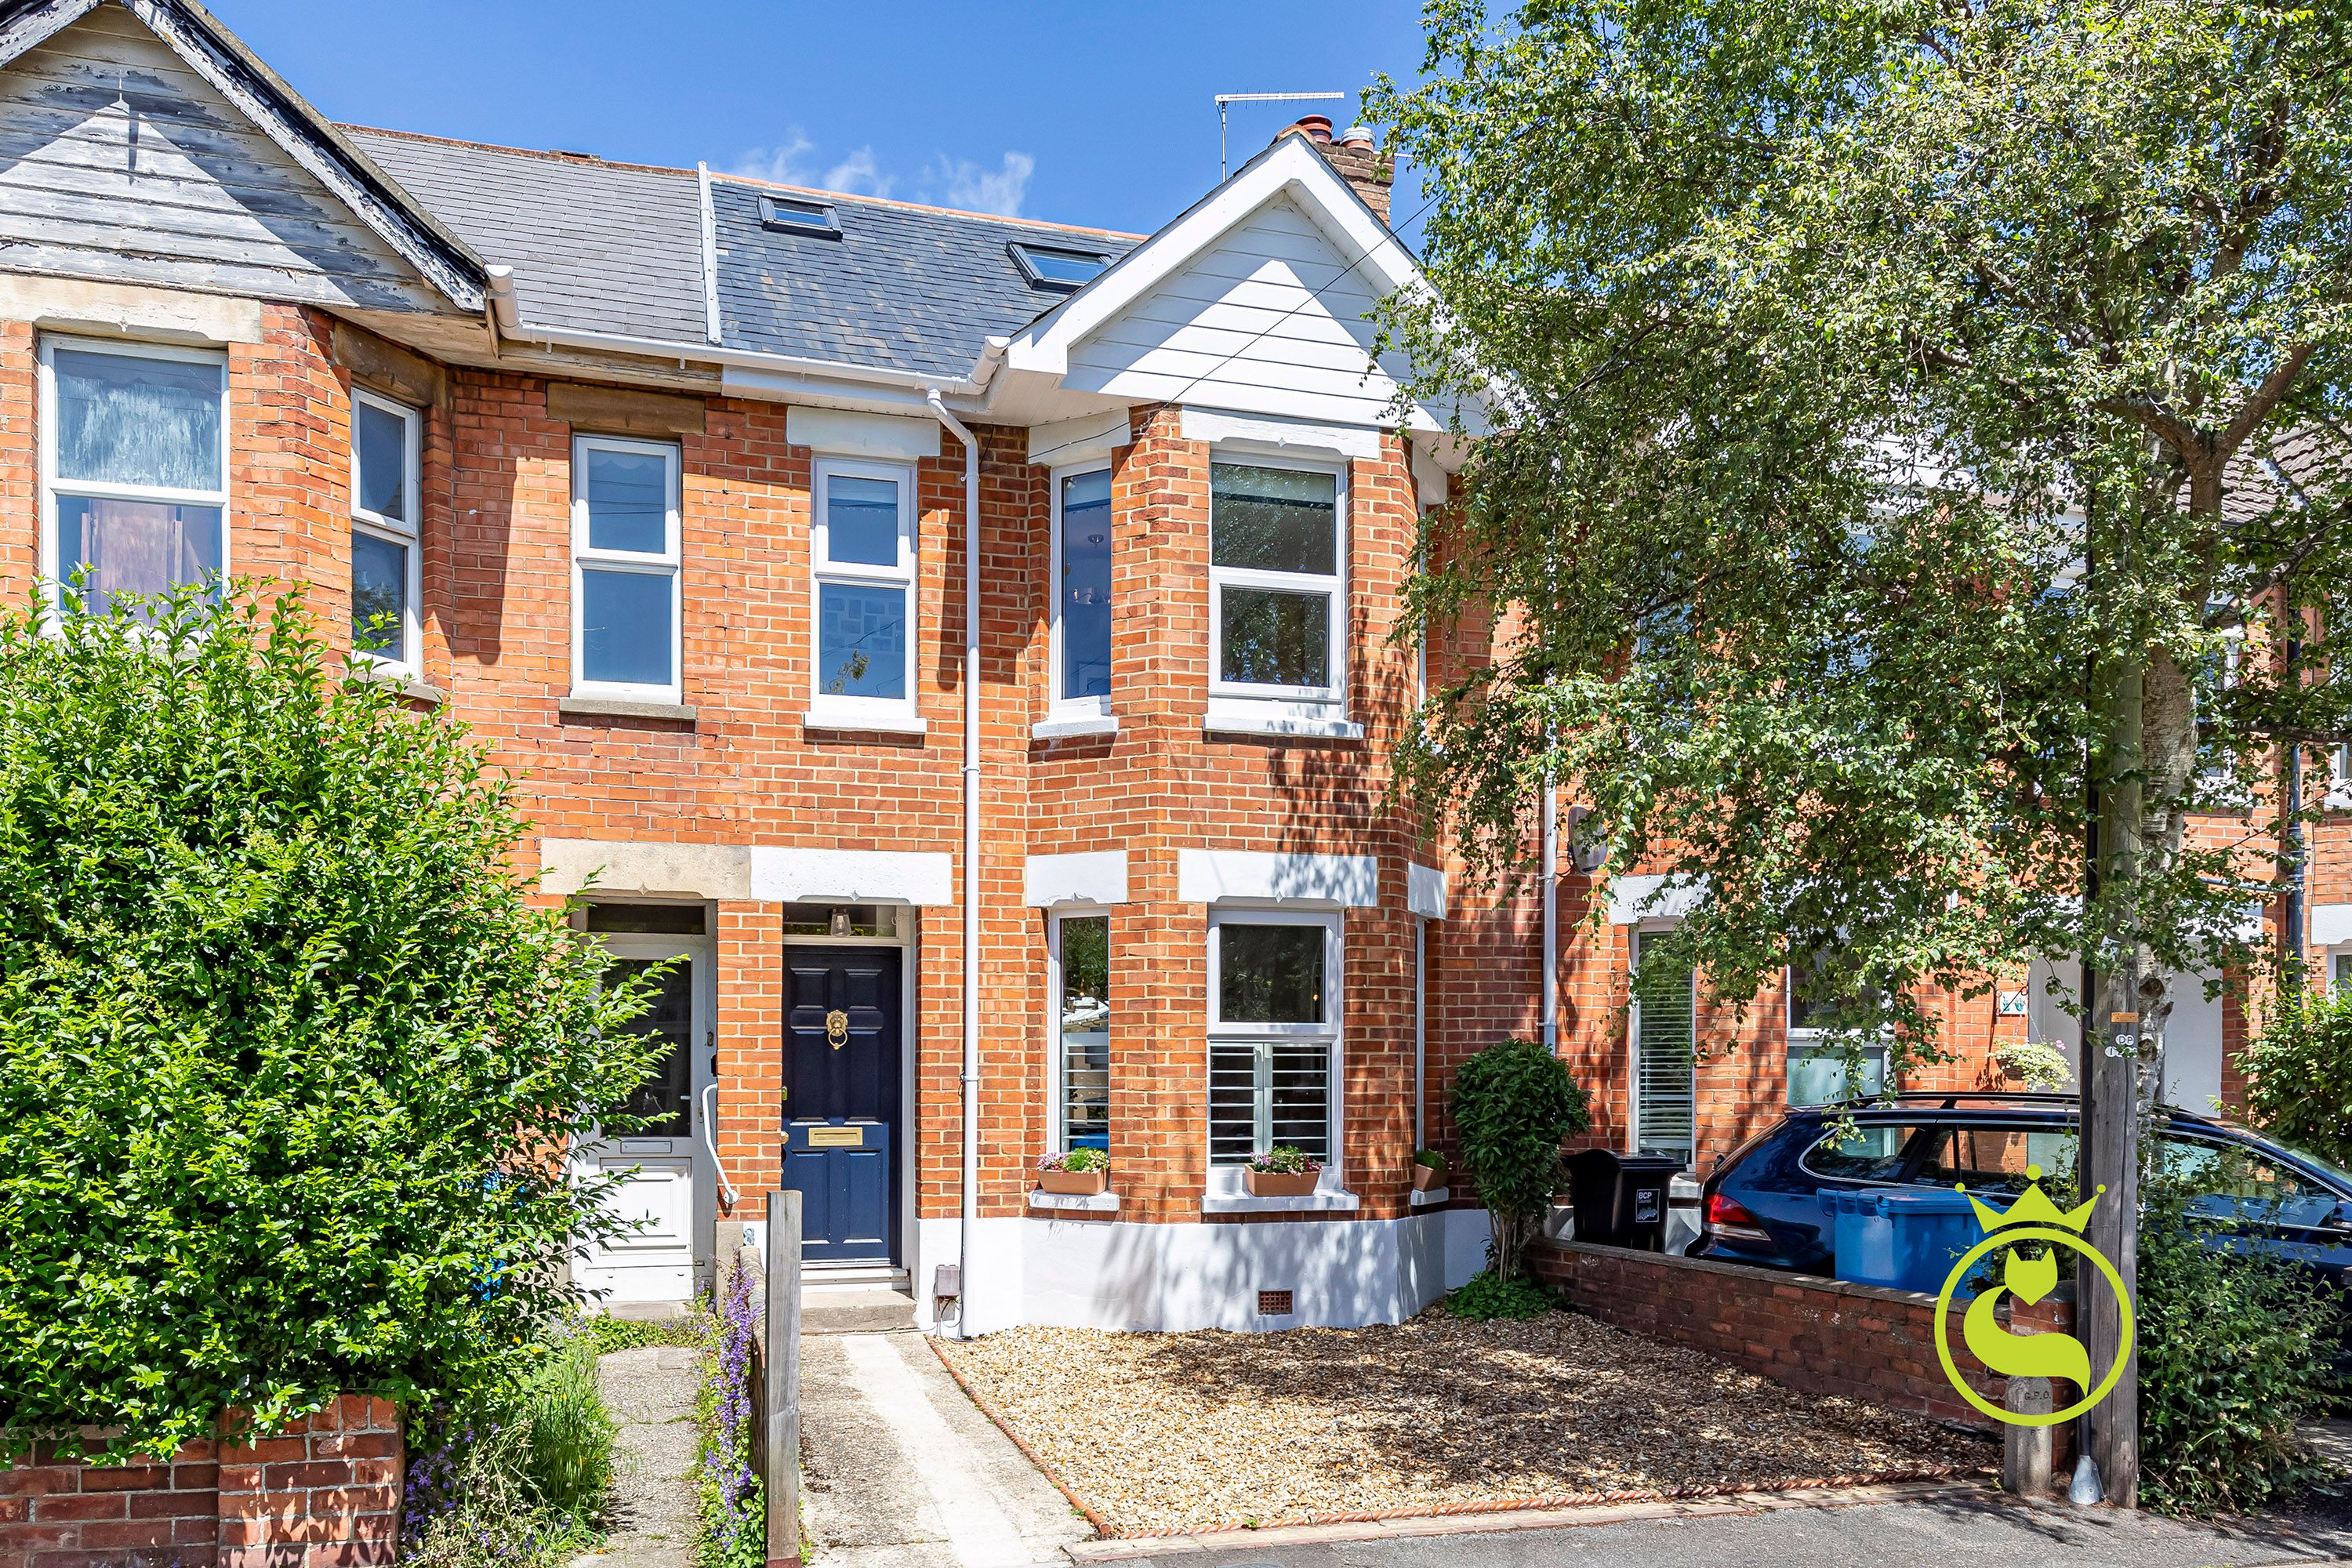 Come & fall in love with this three bedroom Victorian house that has been tastefully & stylishly modernised and decorated throughout, its like something from a magazine with no expense spared.